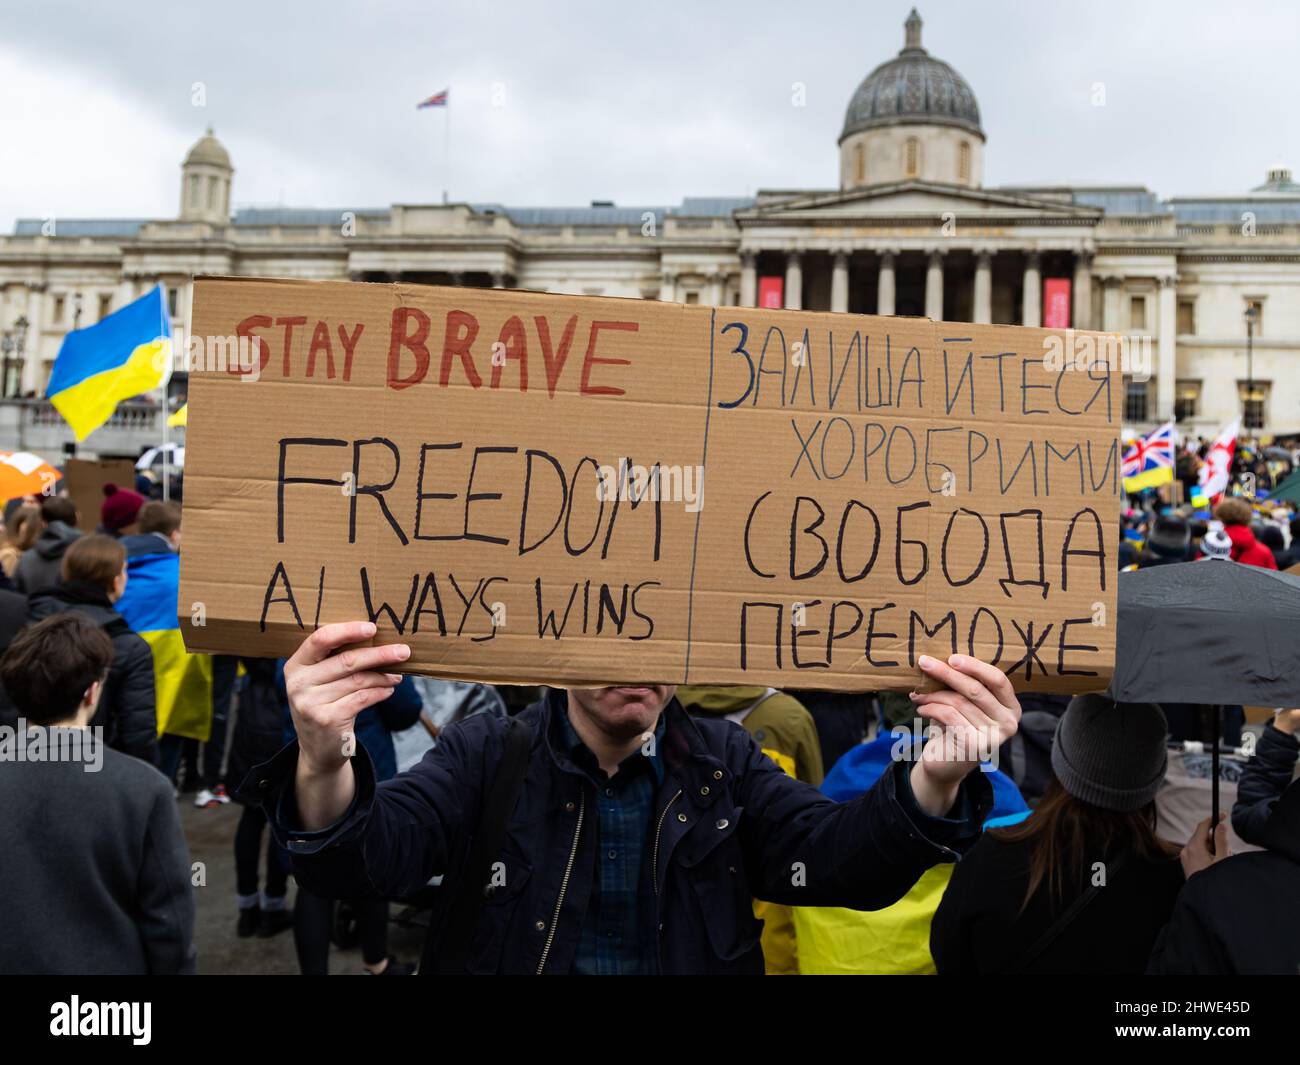 London, UK. 05 March 2022. At a peace demonstration against the Russian invasion of Ukraine a demonstrator holds a sign in front of his face that reads 'STAY BRAVE FREEDOM ALWAYS WINS' © Matt Goodrum/Alamy Live News Stock Photo